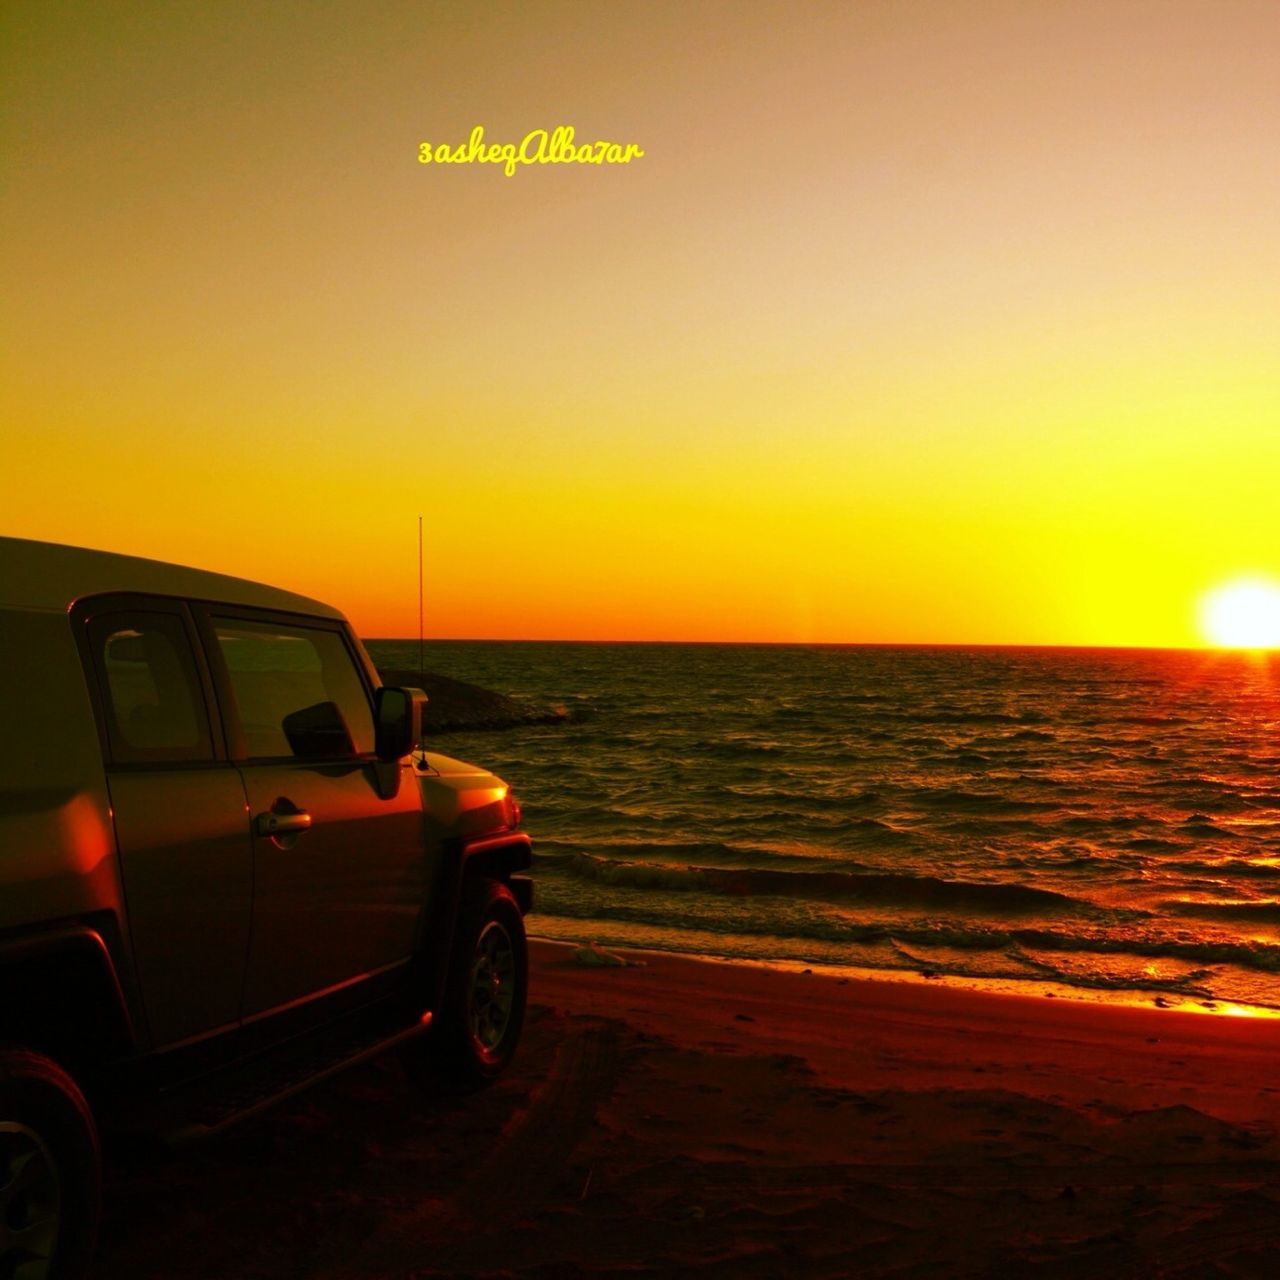 sunset, transportation, mode of transport, land vehicle, orange color, sun, sea, horizon over water, car, water, travel, scenics, beauty in nature, reflection, clear sky, copy space, tranquil scene, tranquility, on the move, yellow